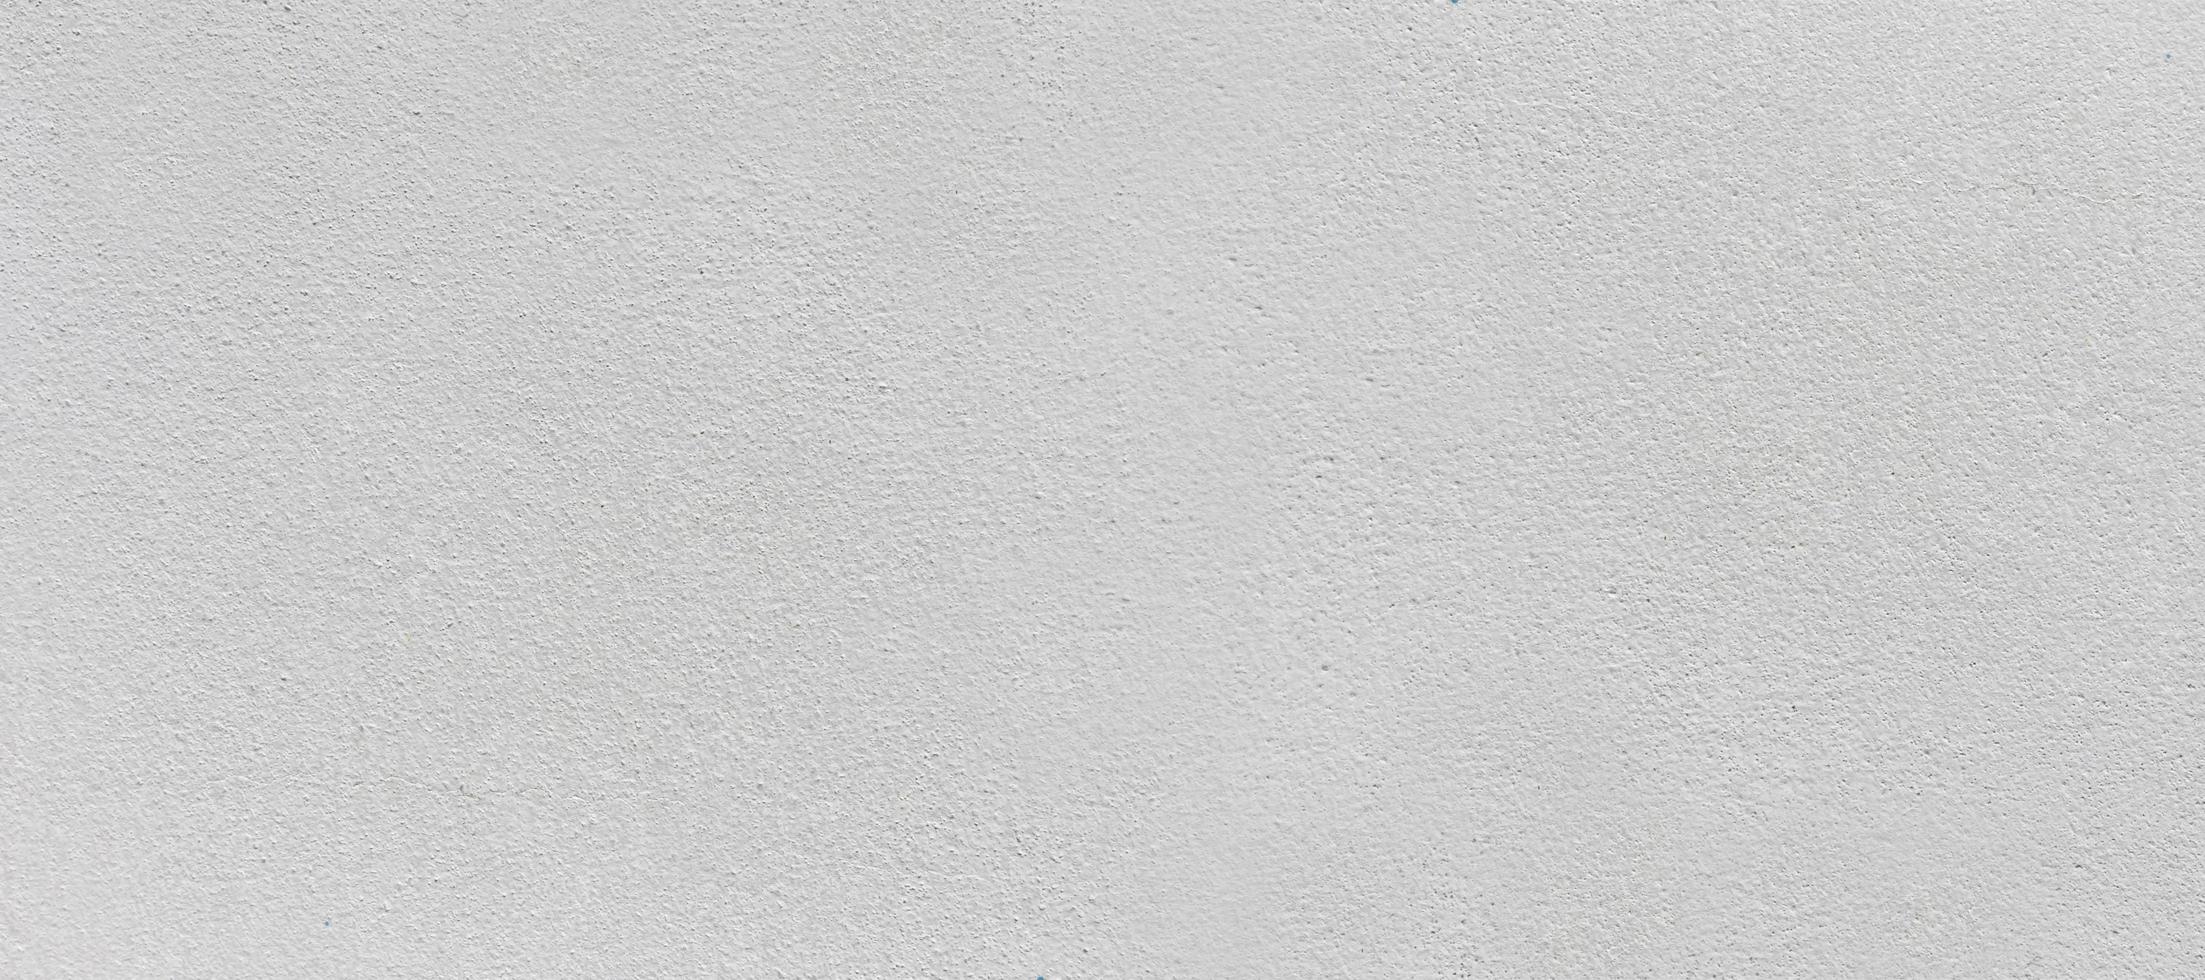 white concrete wall soft texture ,abstract background texture. photo